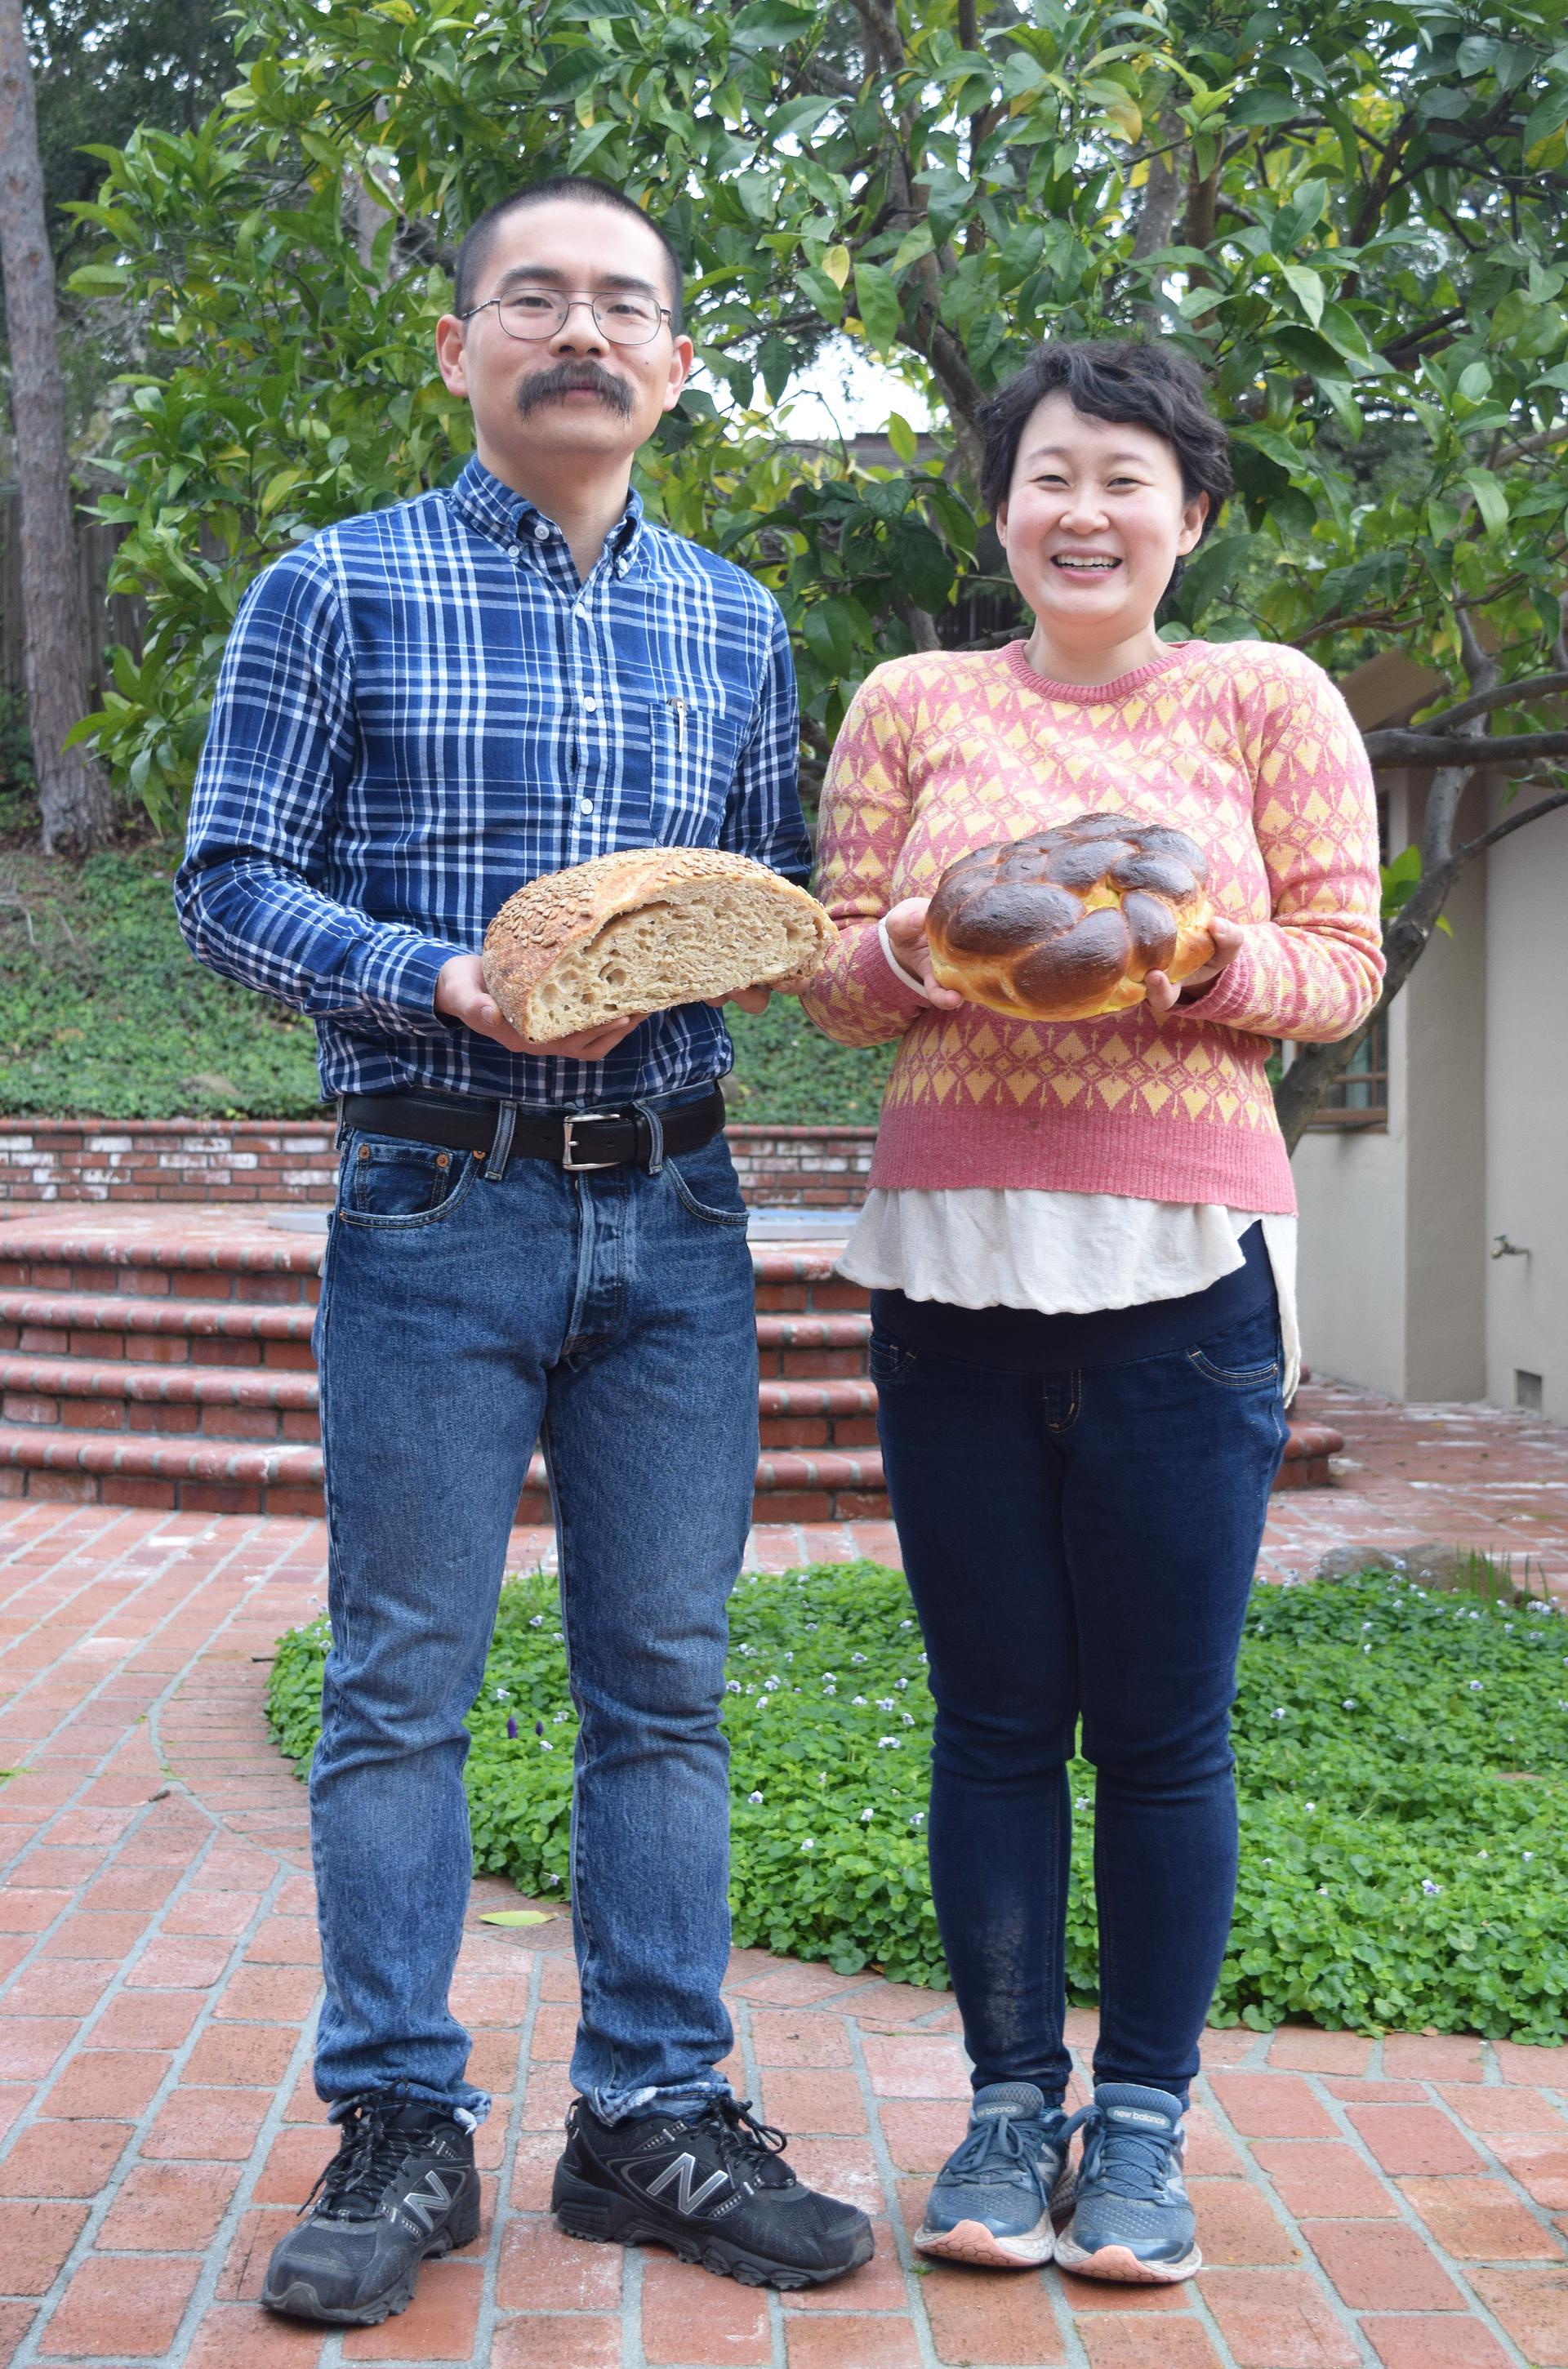 Yan Xu, left, and Tian Mayimin were pals at Harvard and got back together last year as partners in Little Sky Bakery.